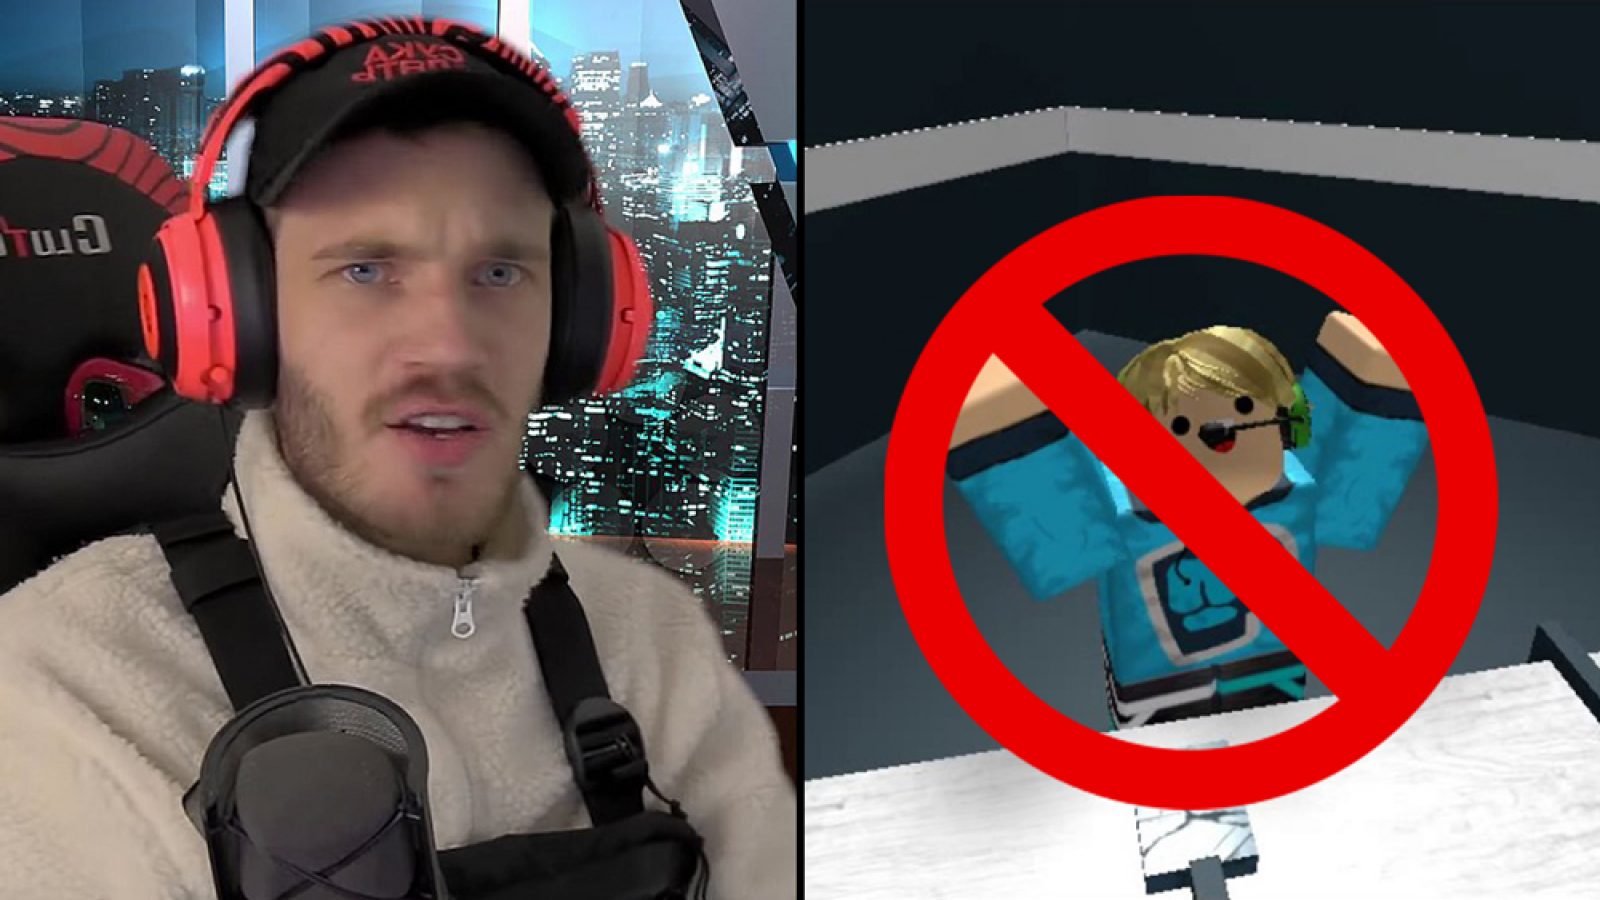 Here's why PewDiePie was banned from Roblox - Dexerto